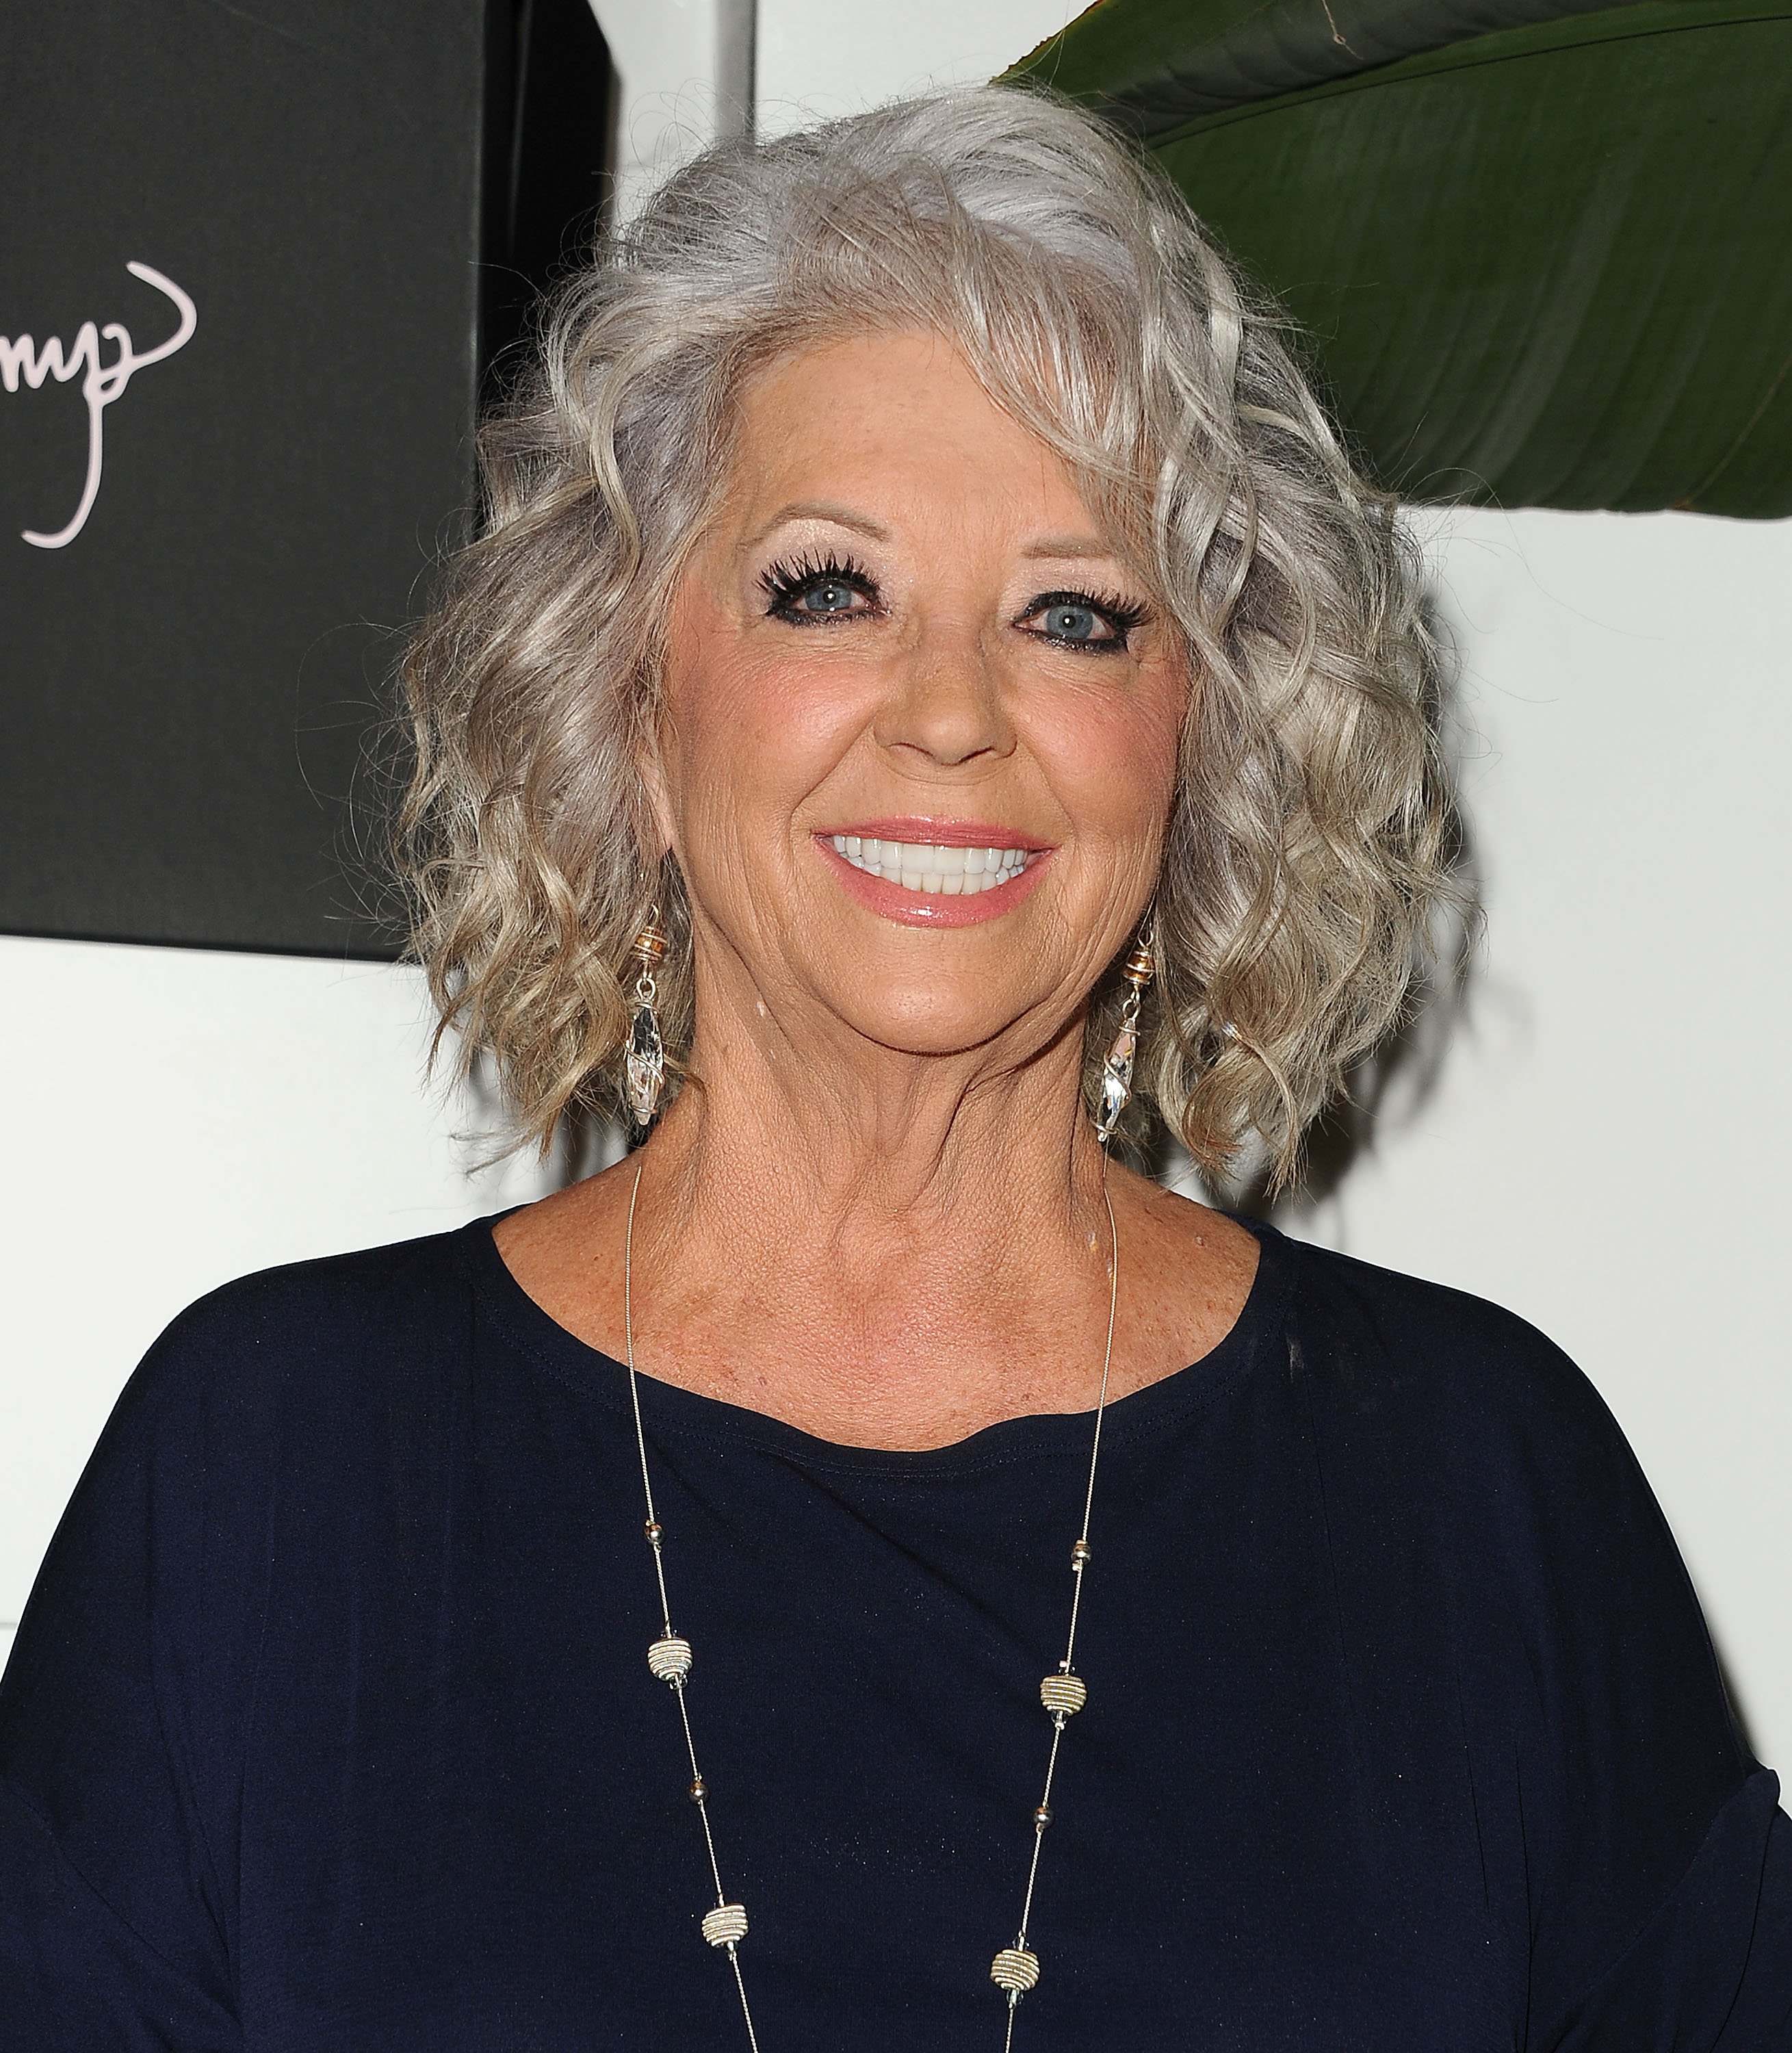 Paula Deen attends the EVINE Live celebration at Villa Blanca on September 29, 2015 in Beverly Hills, California. | Source: Getty Images